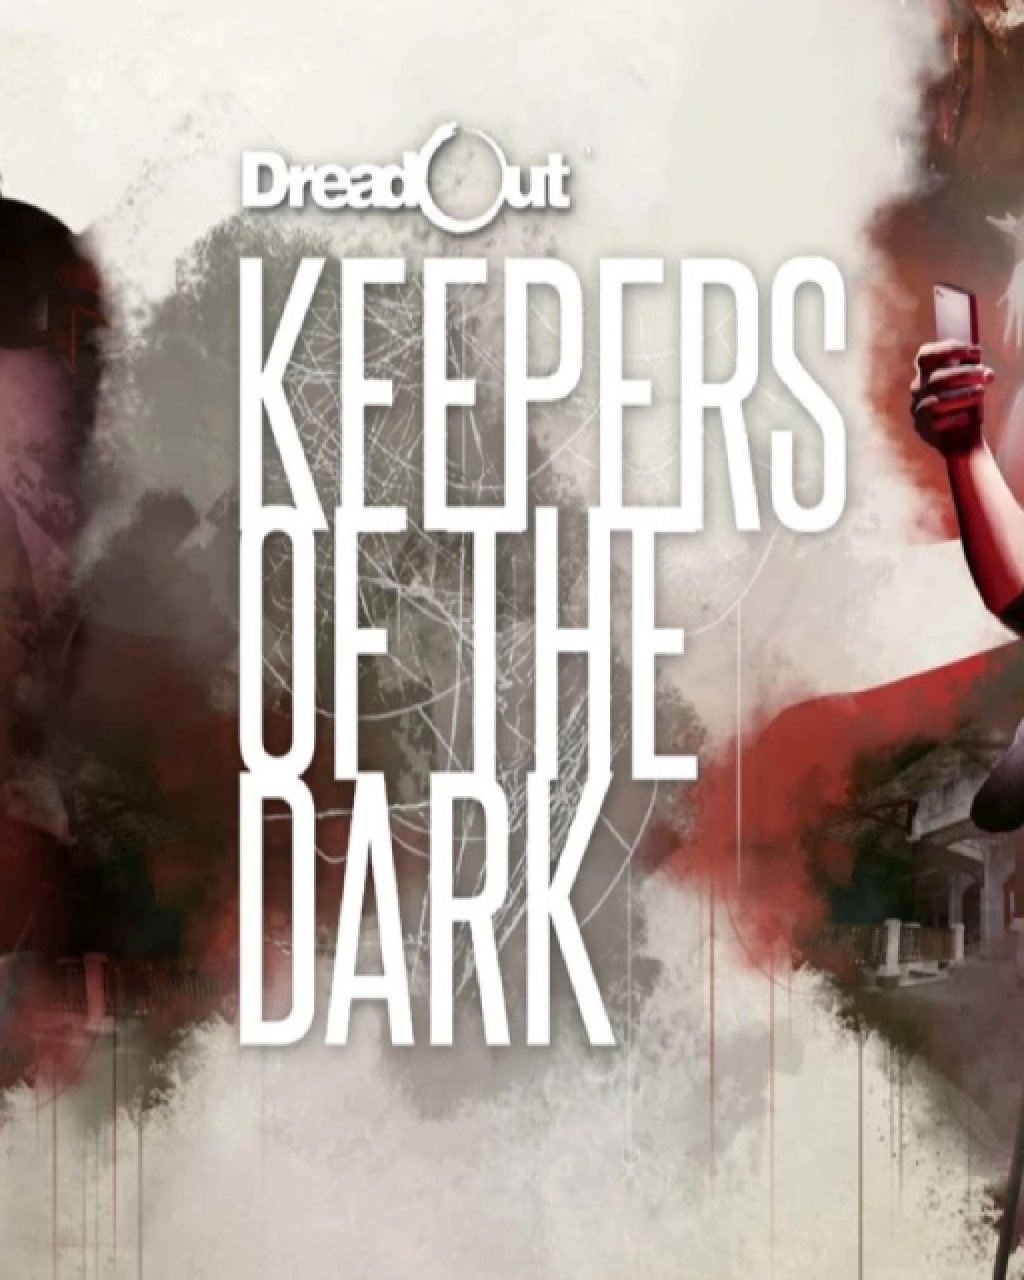 DreadOut Keepers of The Dark